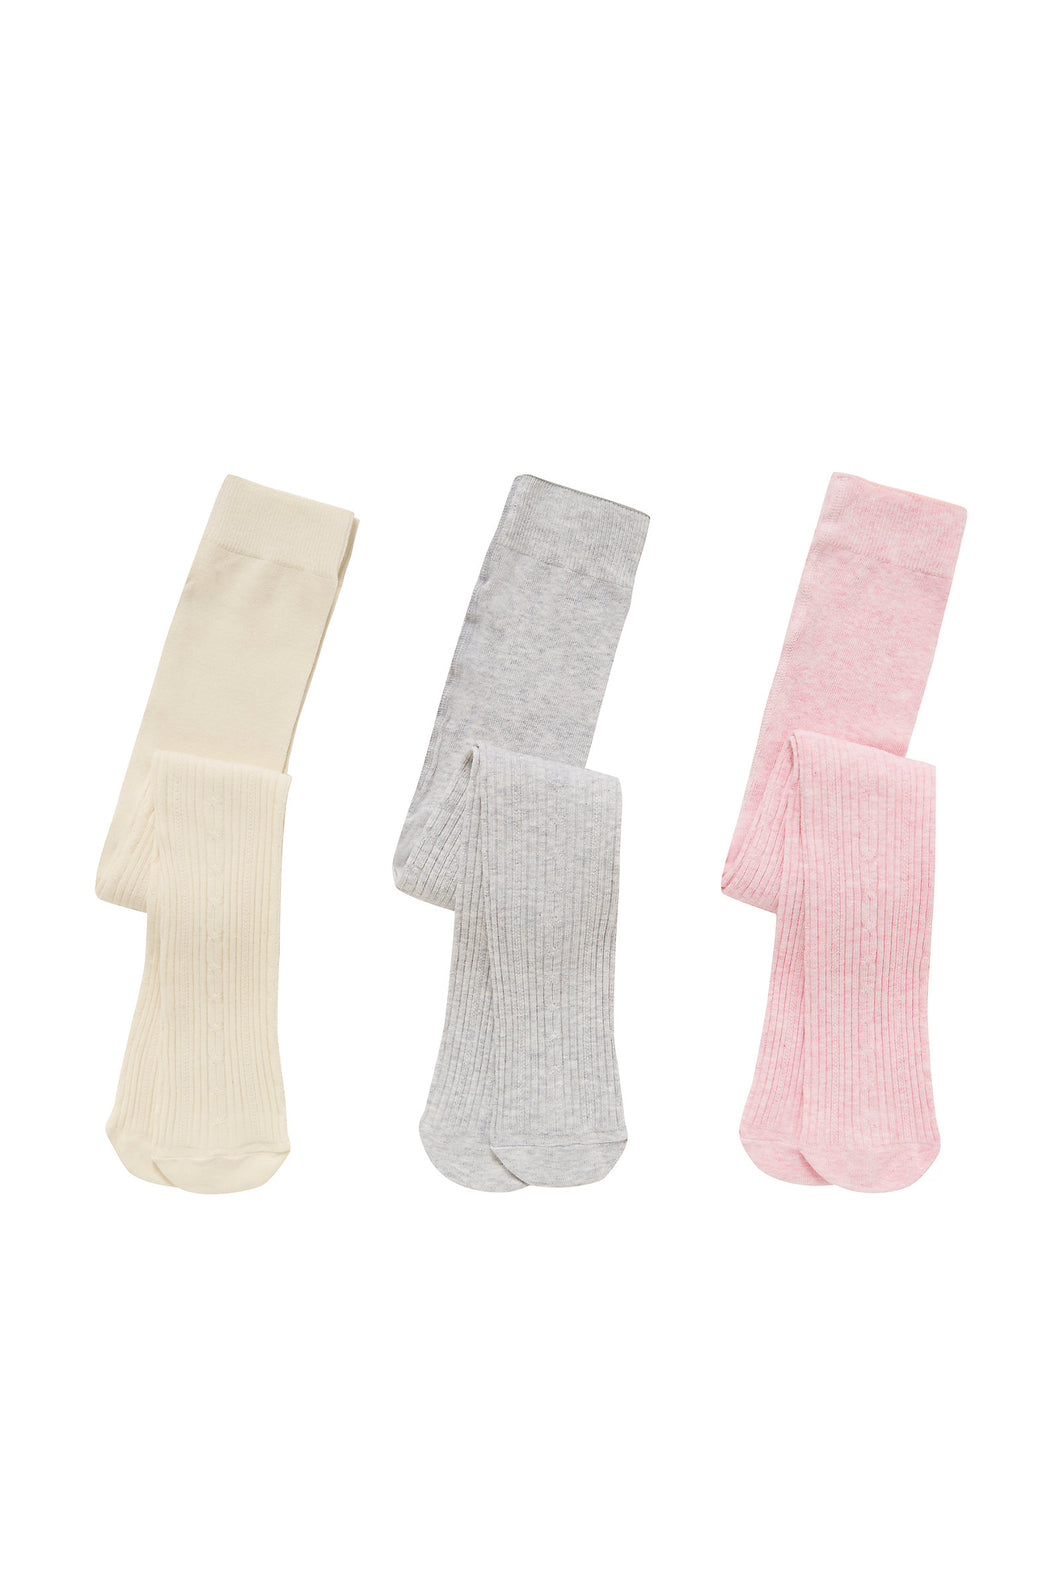 Mothercare Cable Knit Tights - 3 Pack